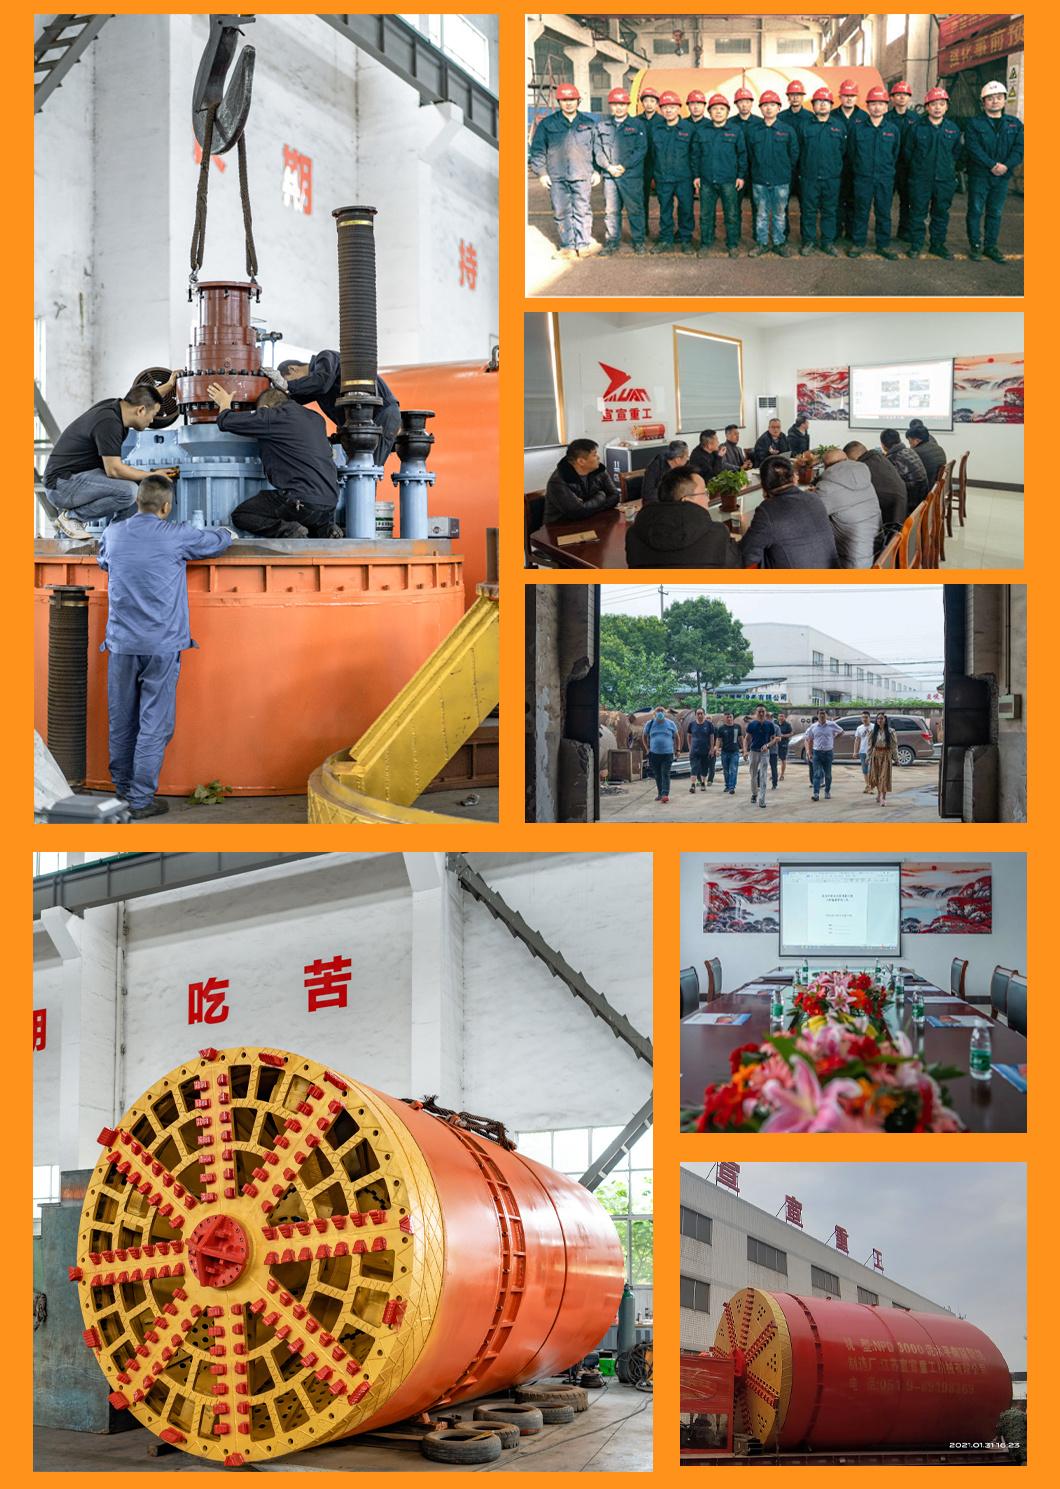 High Efficient Quality Trenchless Project Ysd3000 Rock Pipe Jacking Machine for Rcc